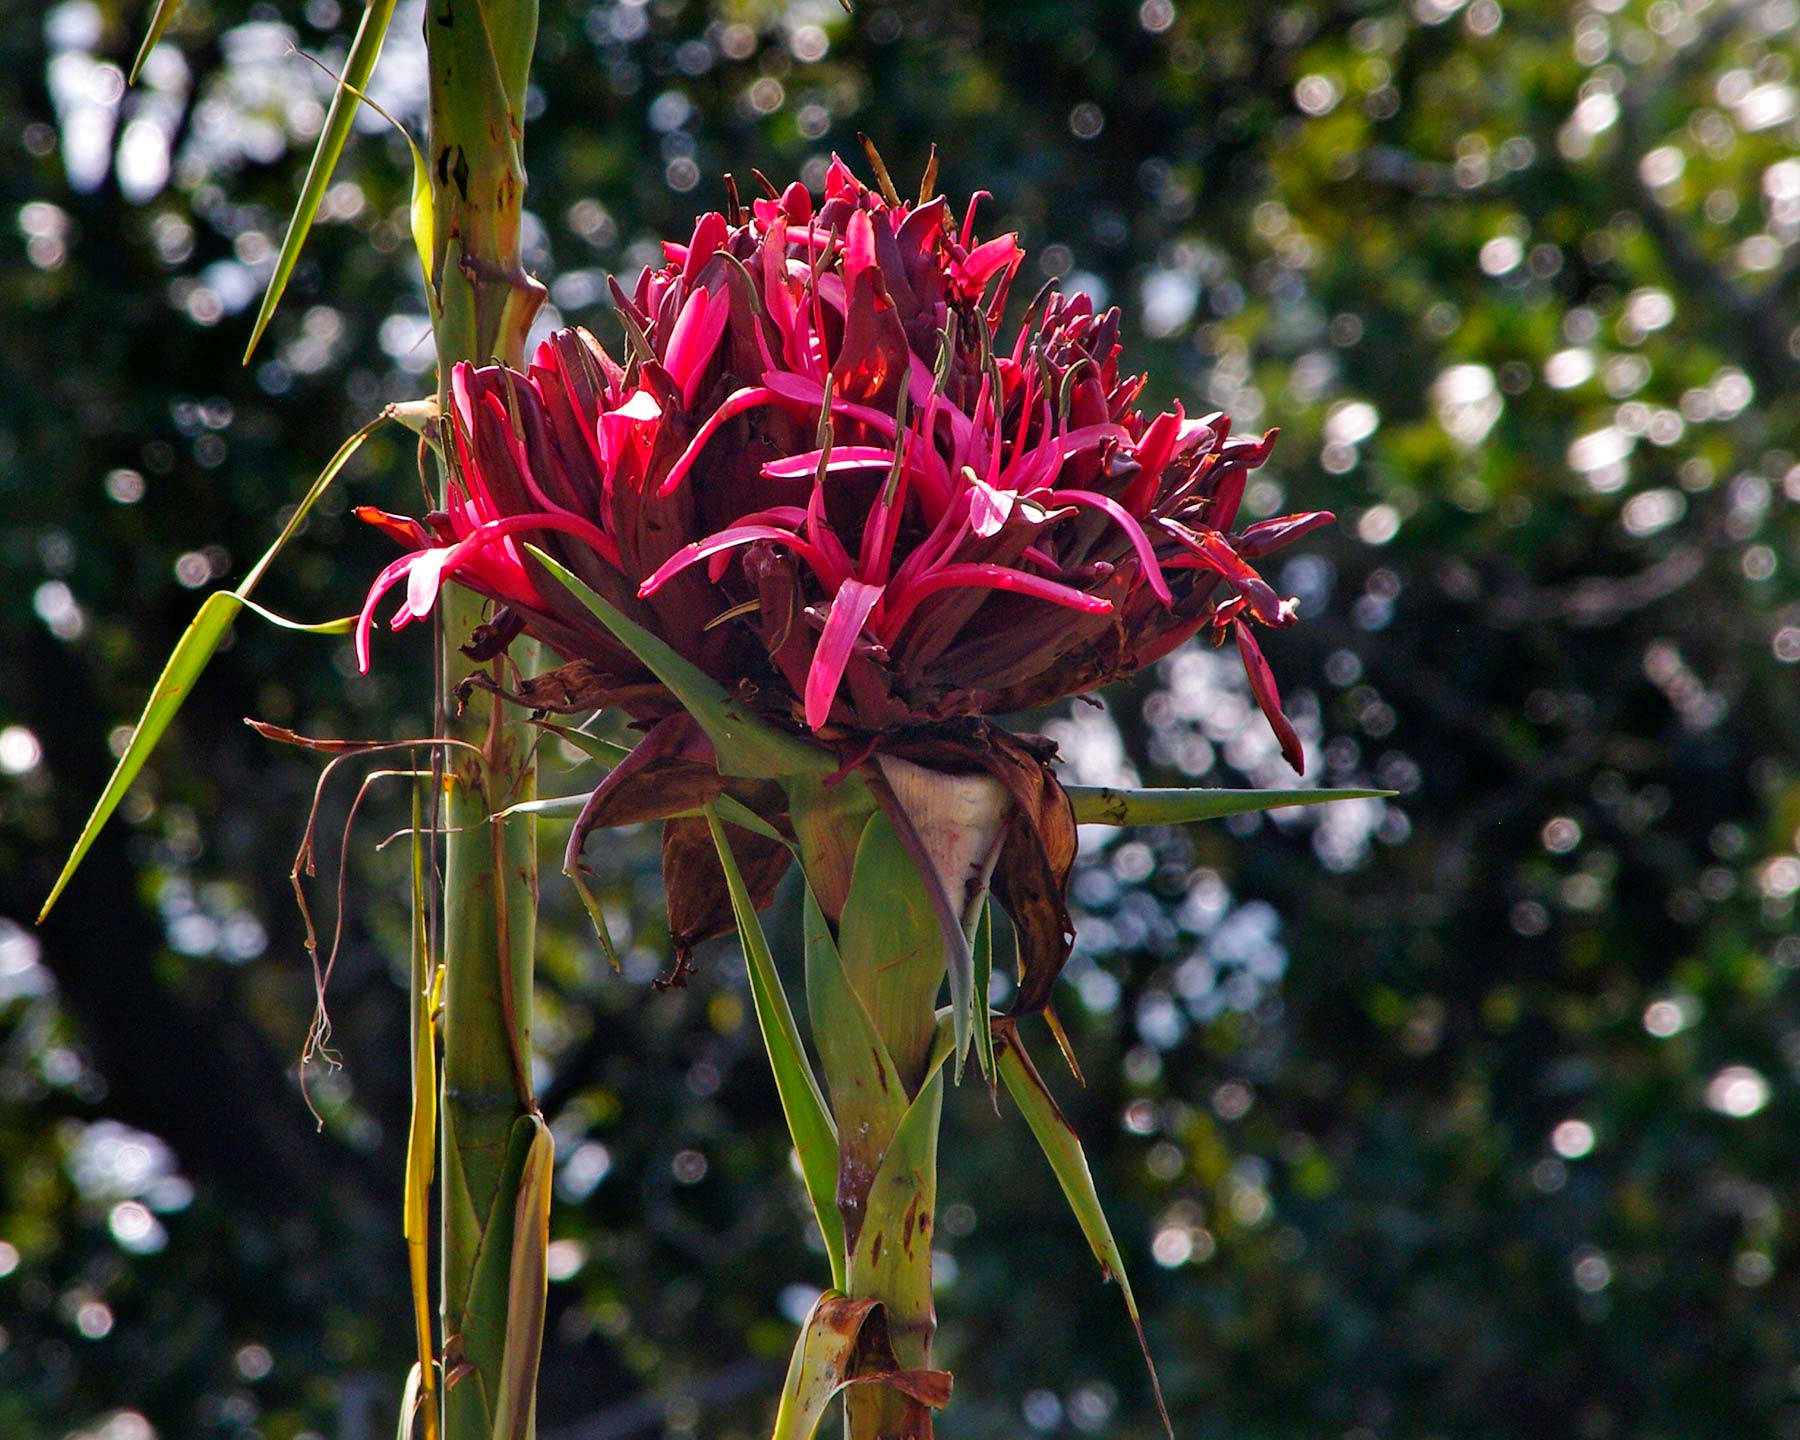 Doryanthes excelsa - as used in street plantings in Sydney during the 2000 Olympics to represent the torch and flame